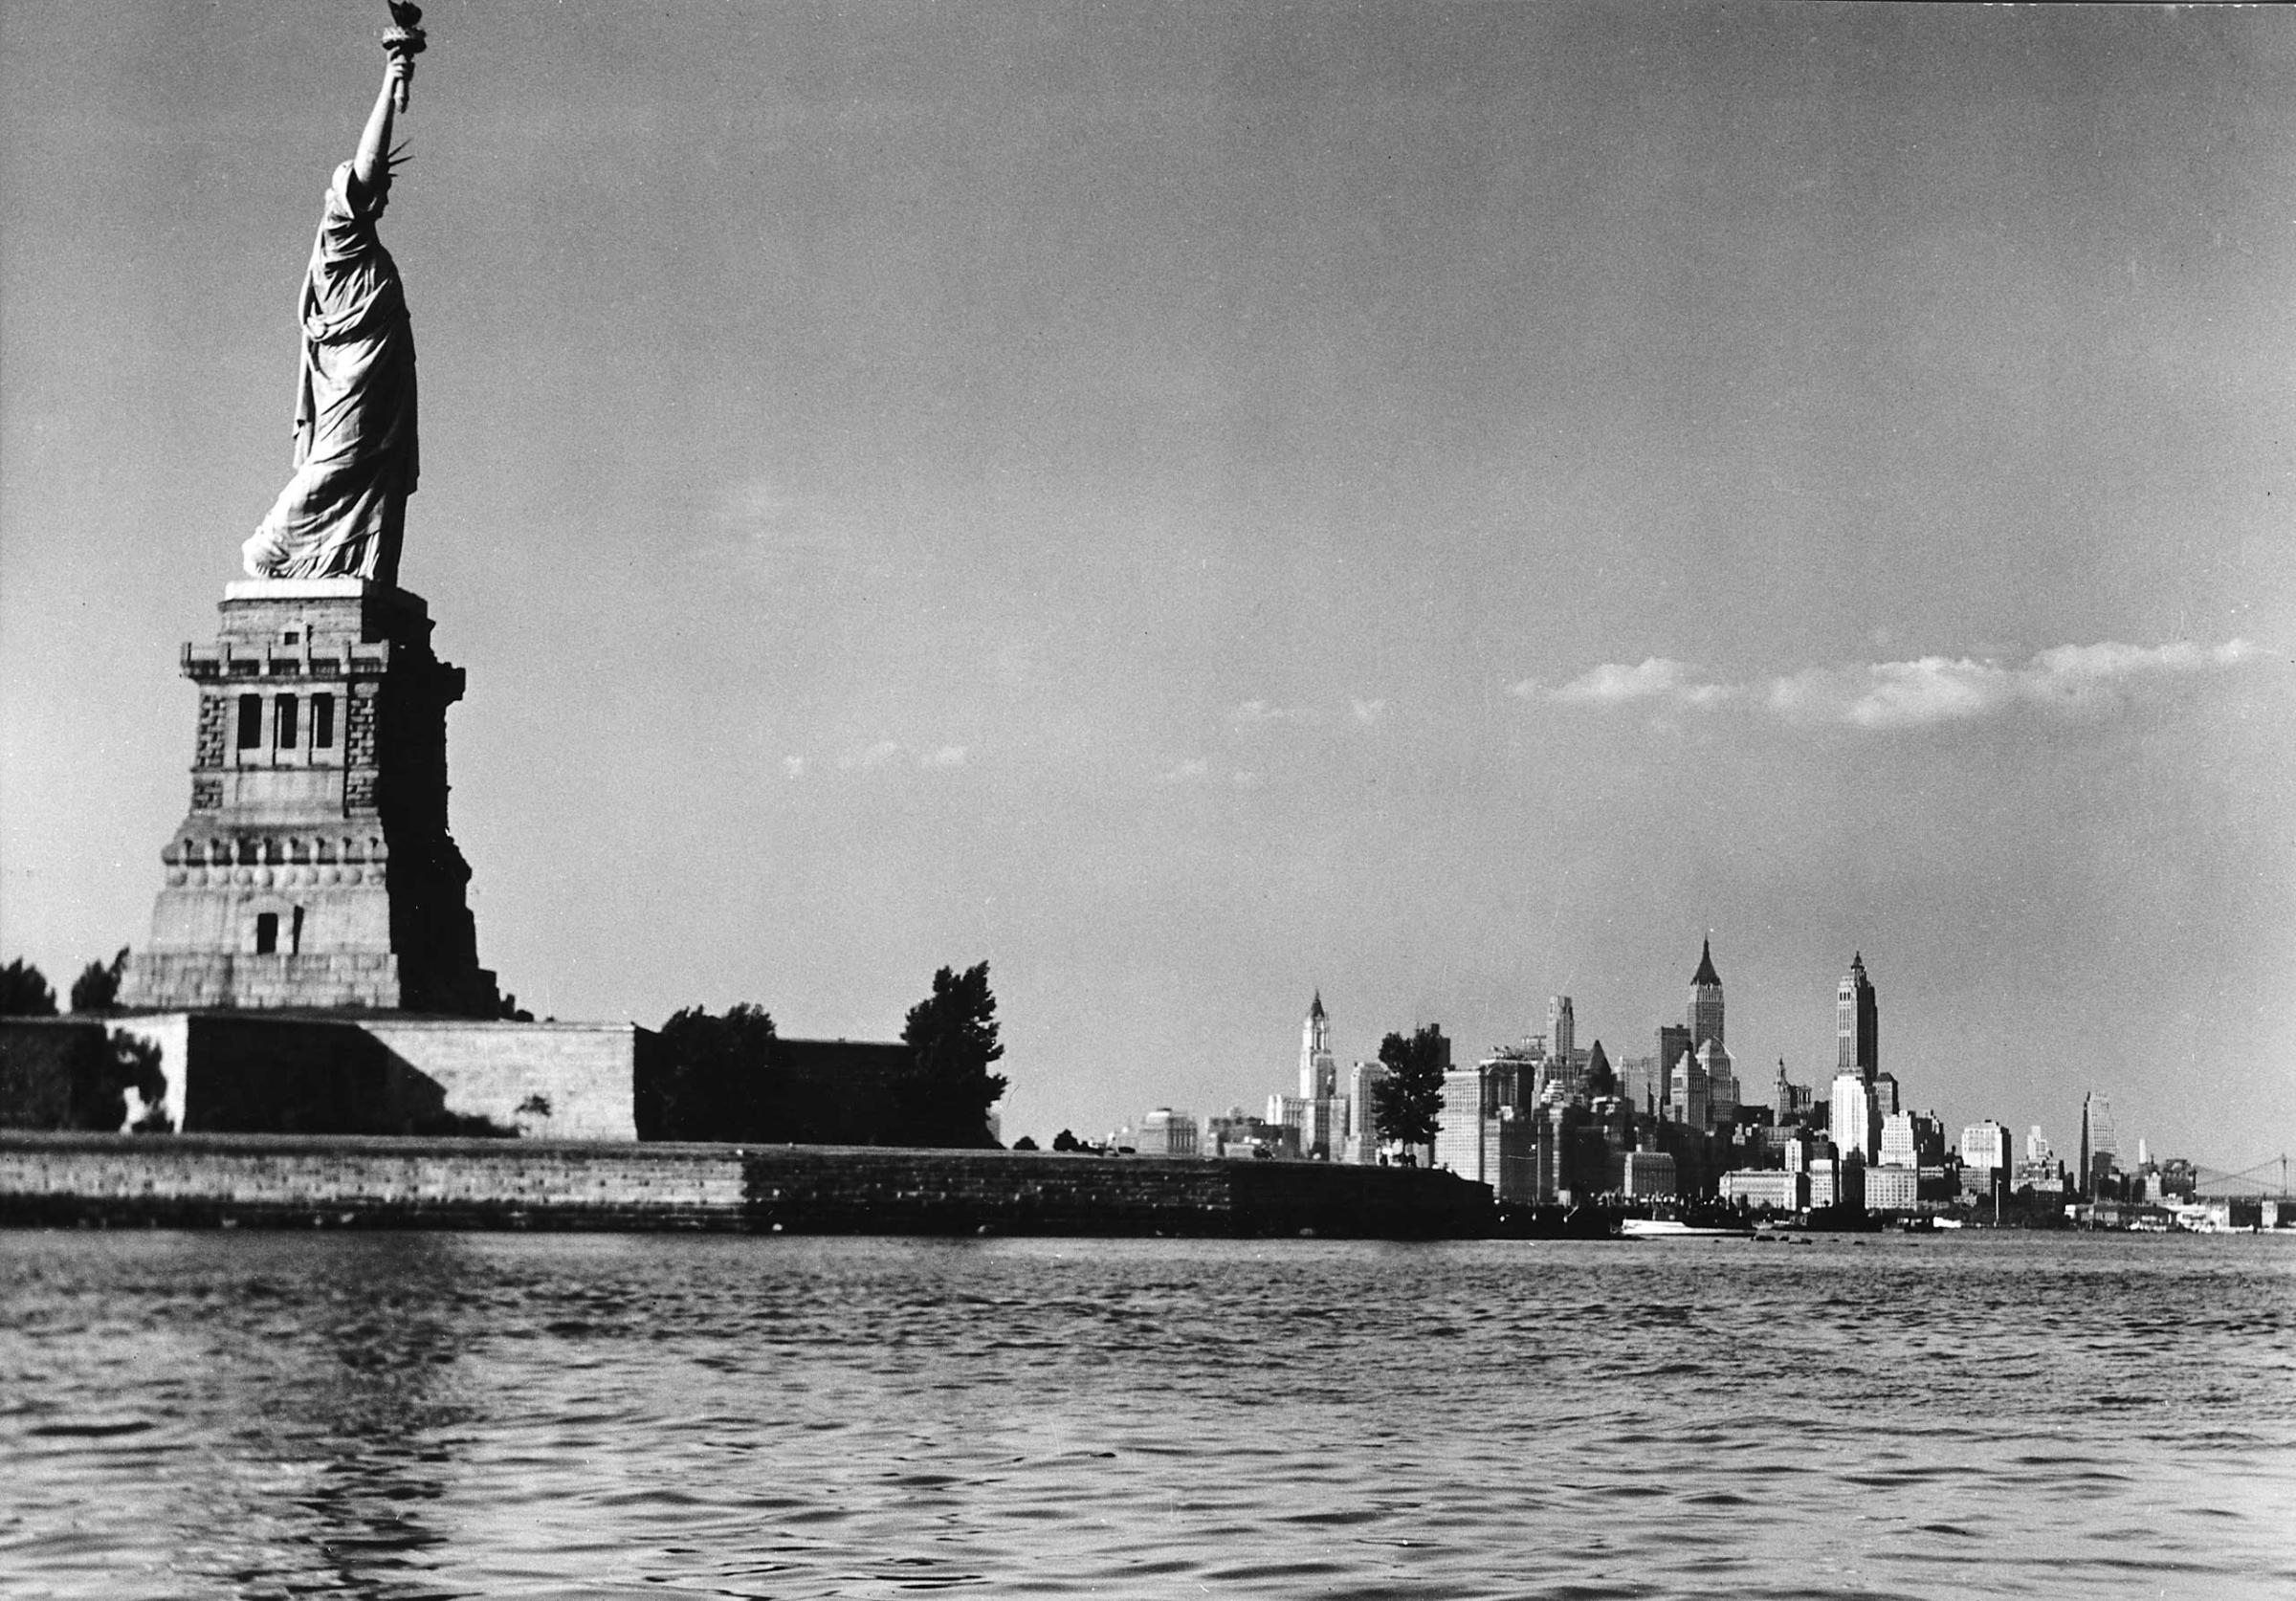 The Statue of Liberty and the New York skyline, 1939.